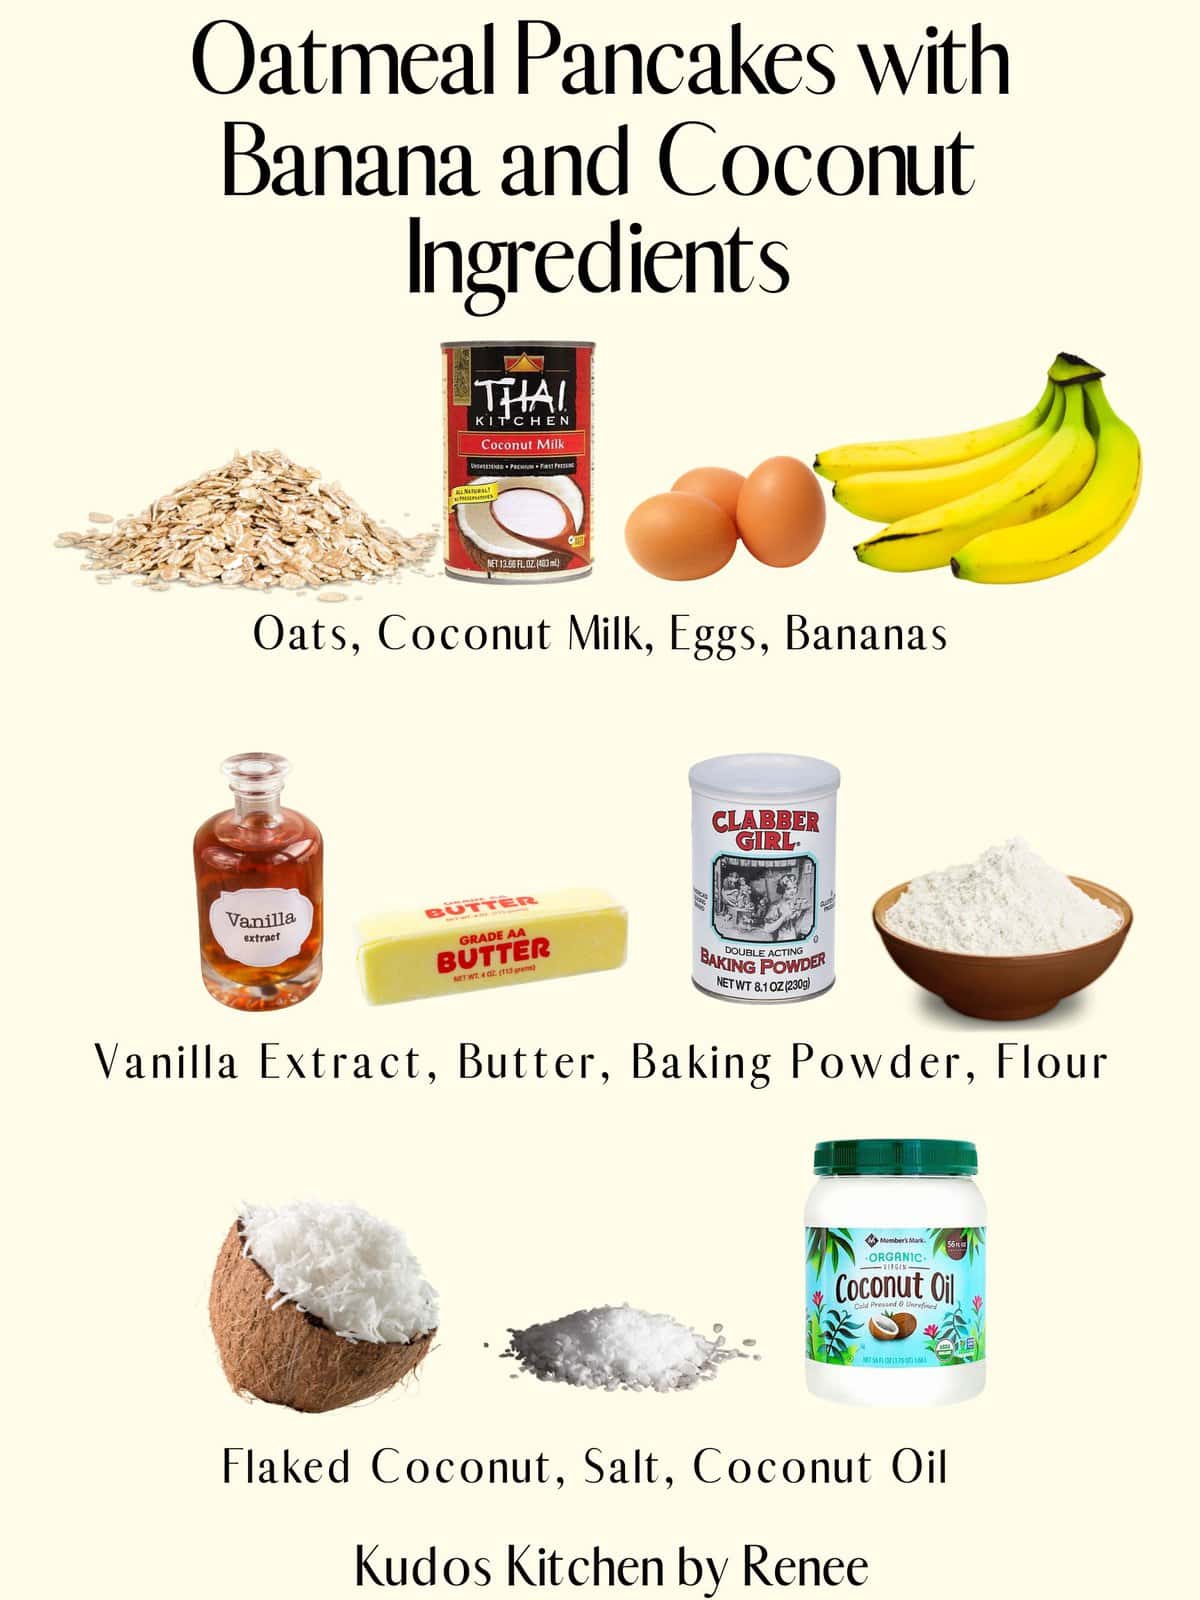 A visual graphic ingredient list for making Oatmeal Pancakes.